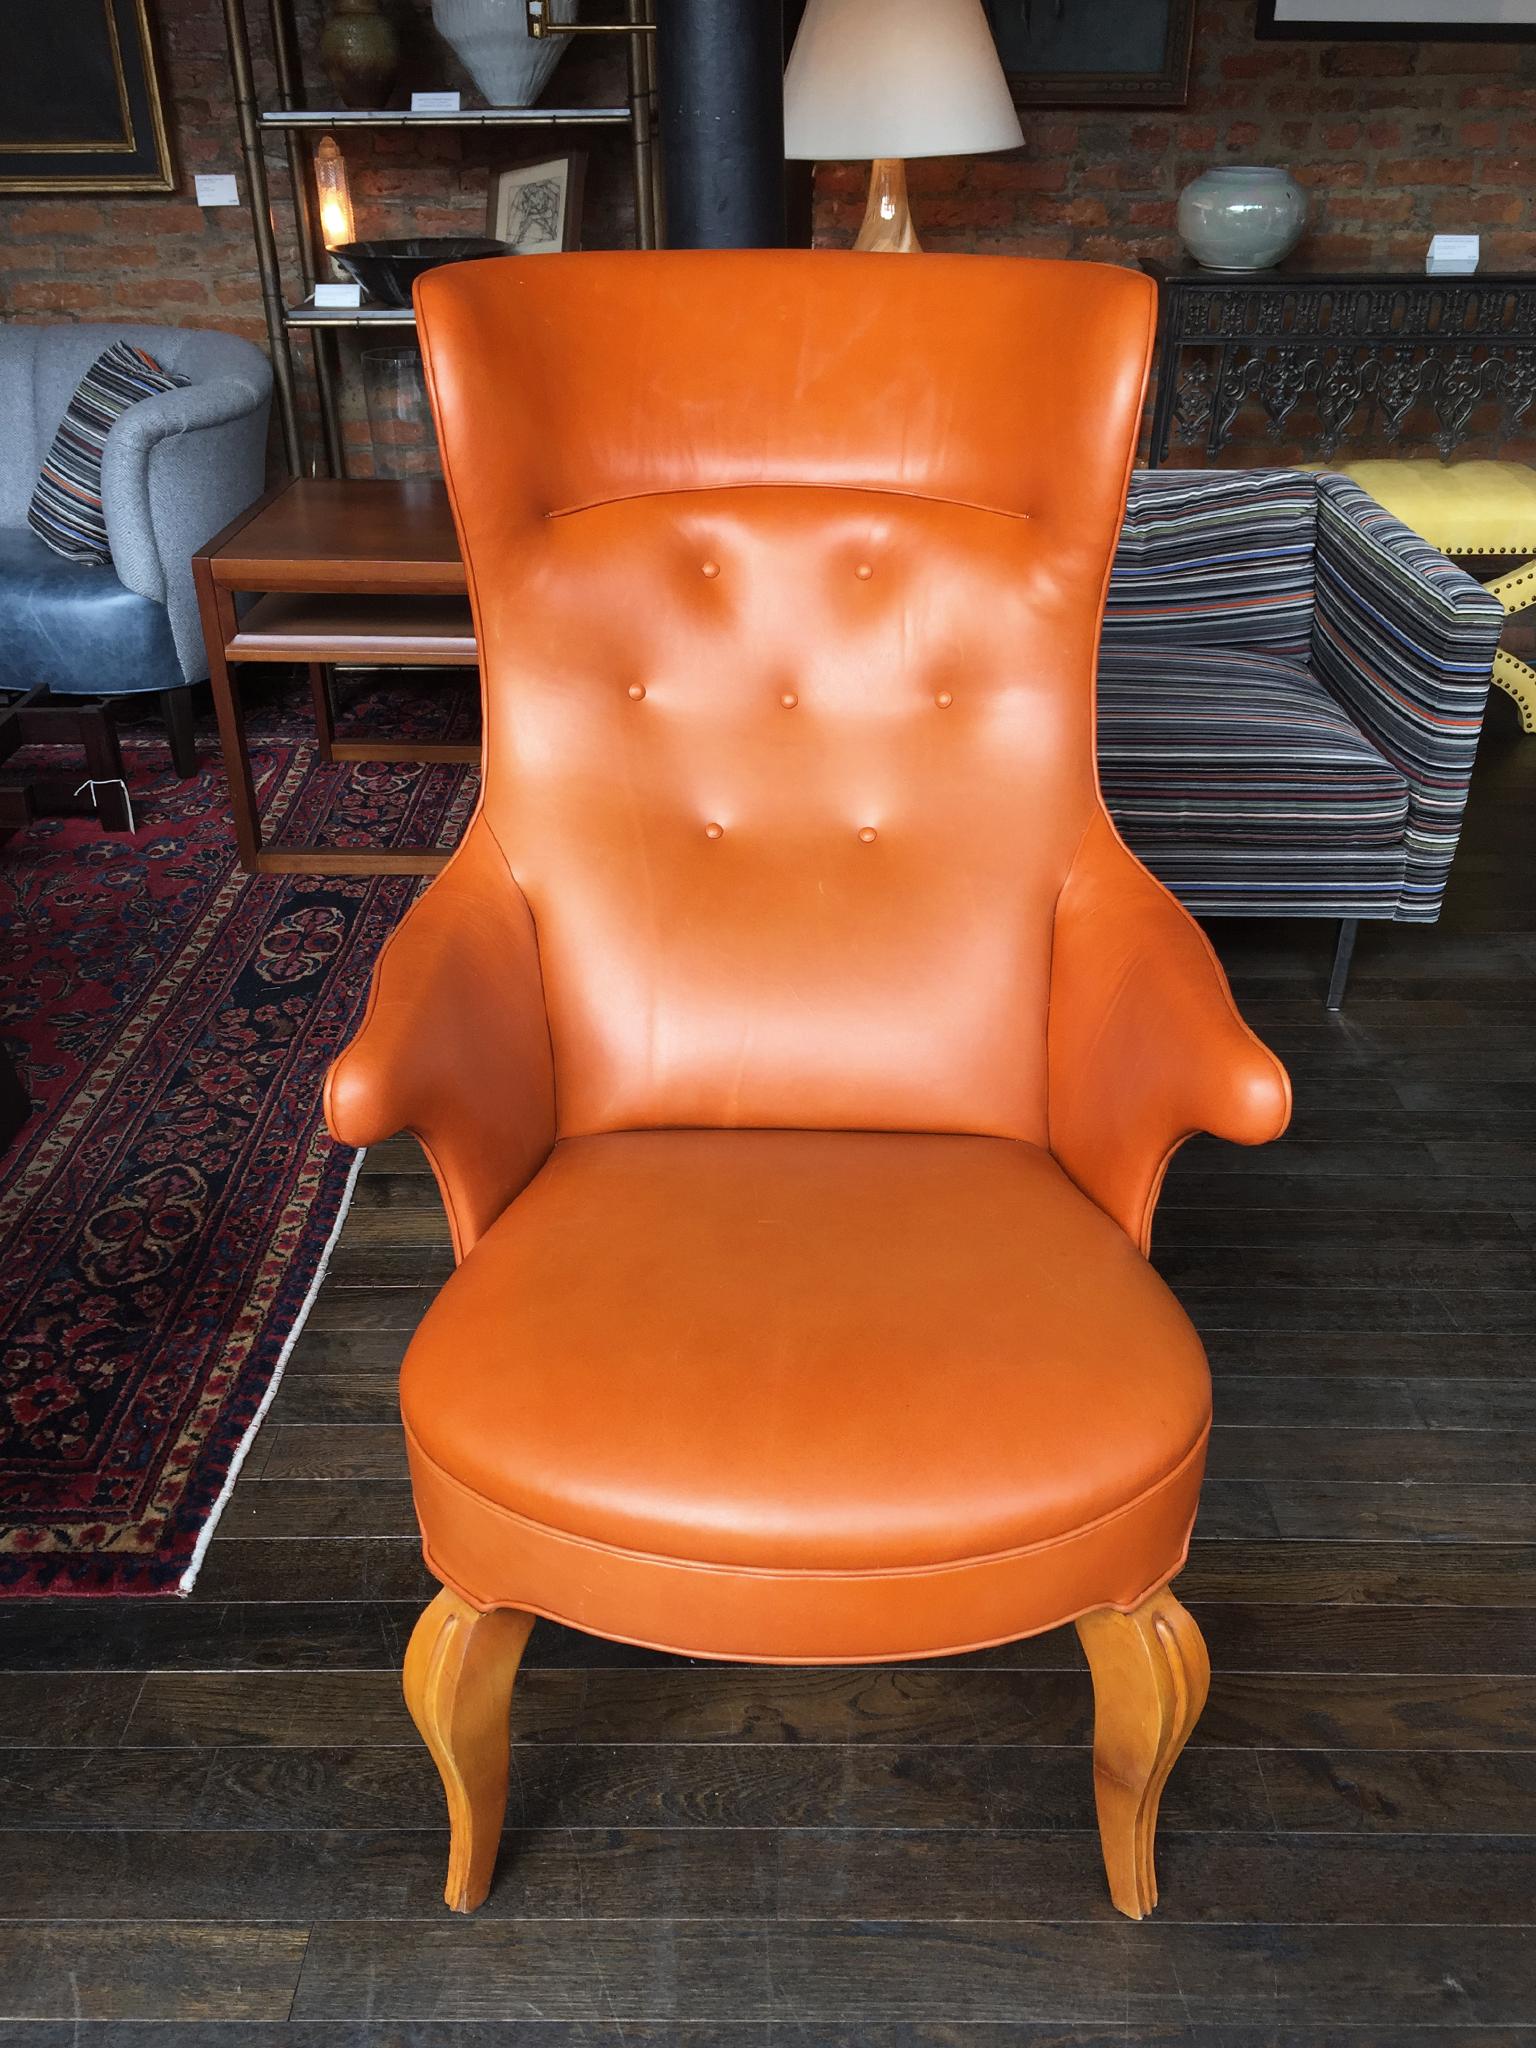 This exceptional high wingback armchair is attributed to Danish designer Frits Henningsen (1899-1965). Henningsen was renowned for the craftsmanship of his handmade furniture. He created the design for this chair in the 1930s. This particular chair